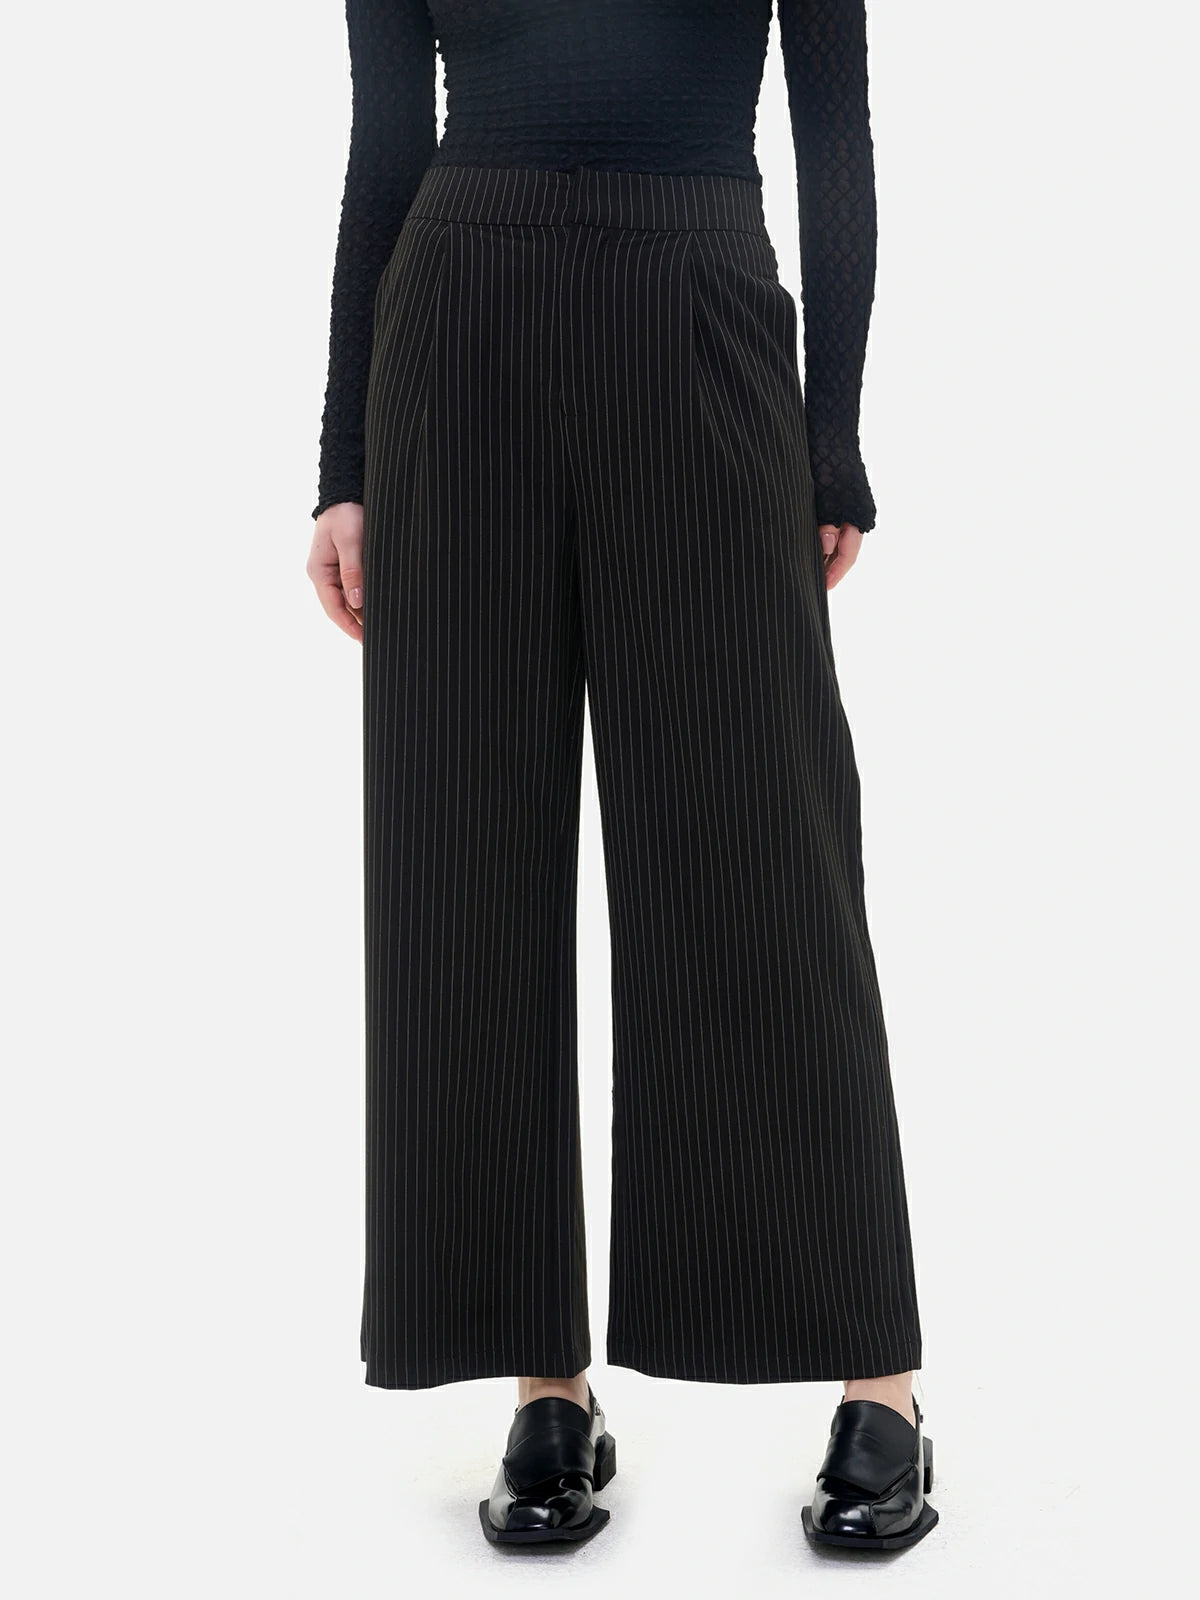 Elevate your style with these vertical stripe wide-leg pants, combining timeless elegance with fashionable comfort.